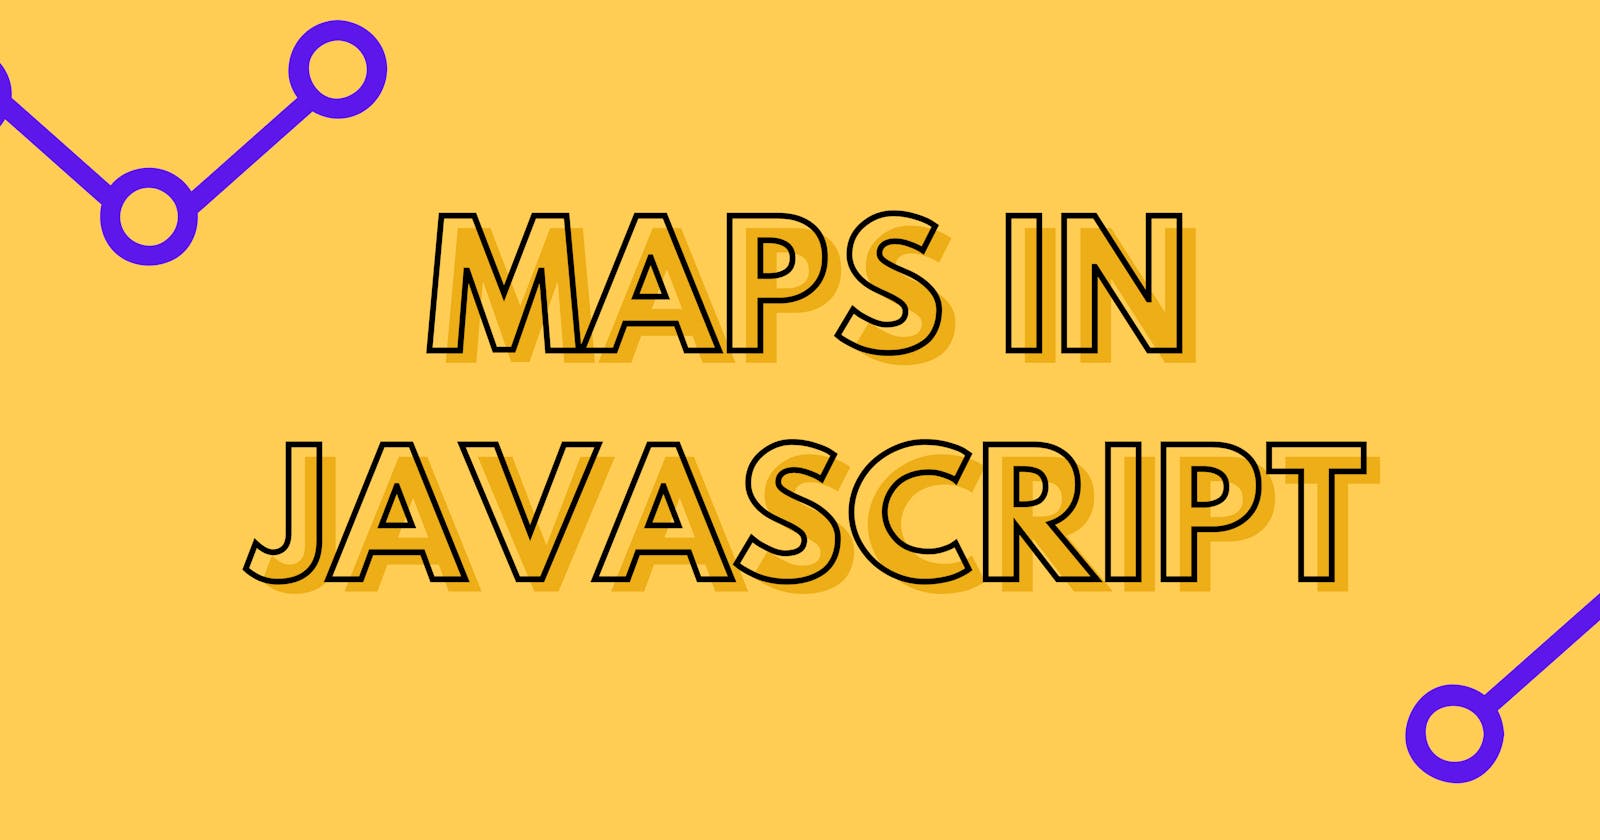 Introduction to Maps in JavaScript